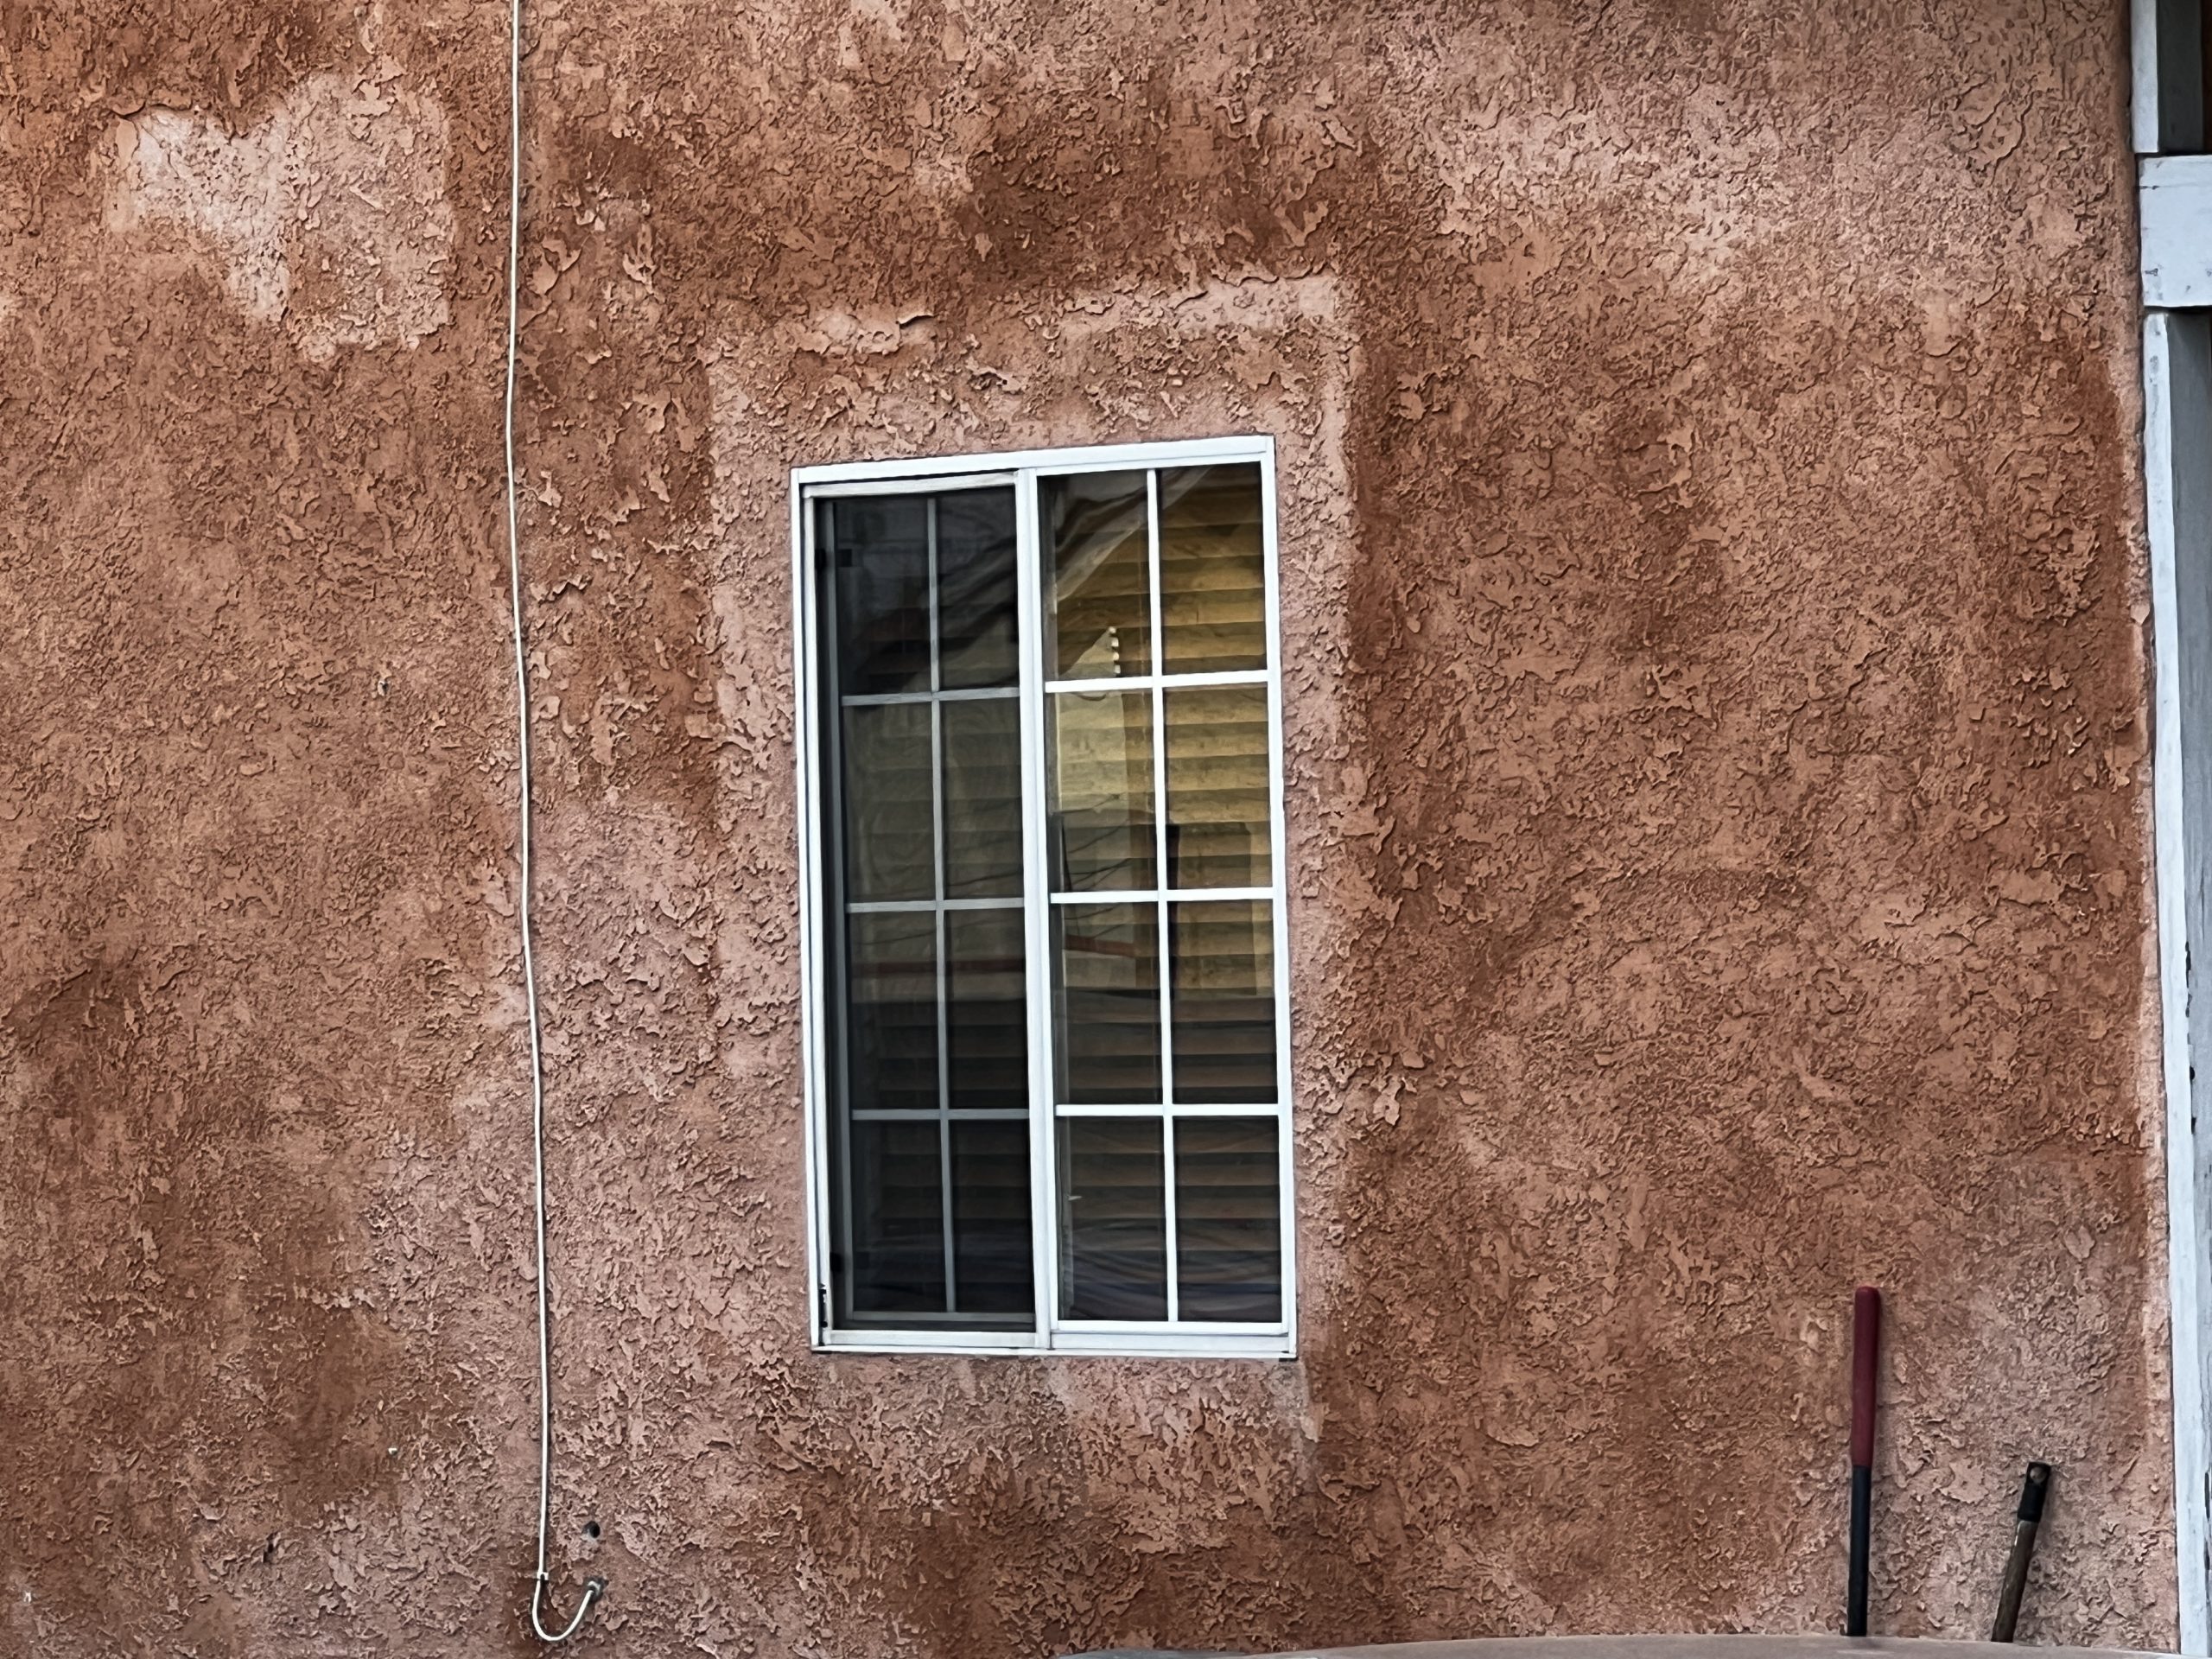 Stucco After Paint